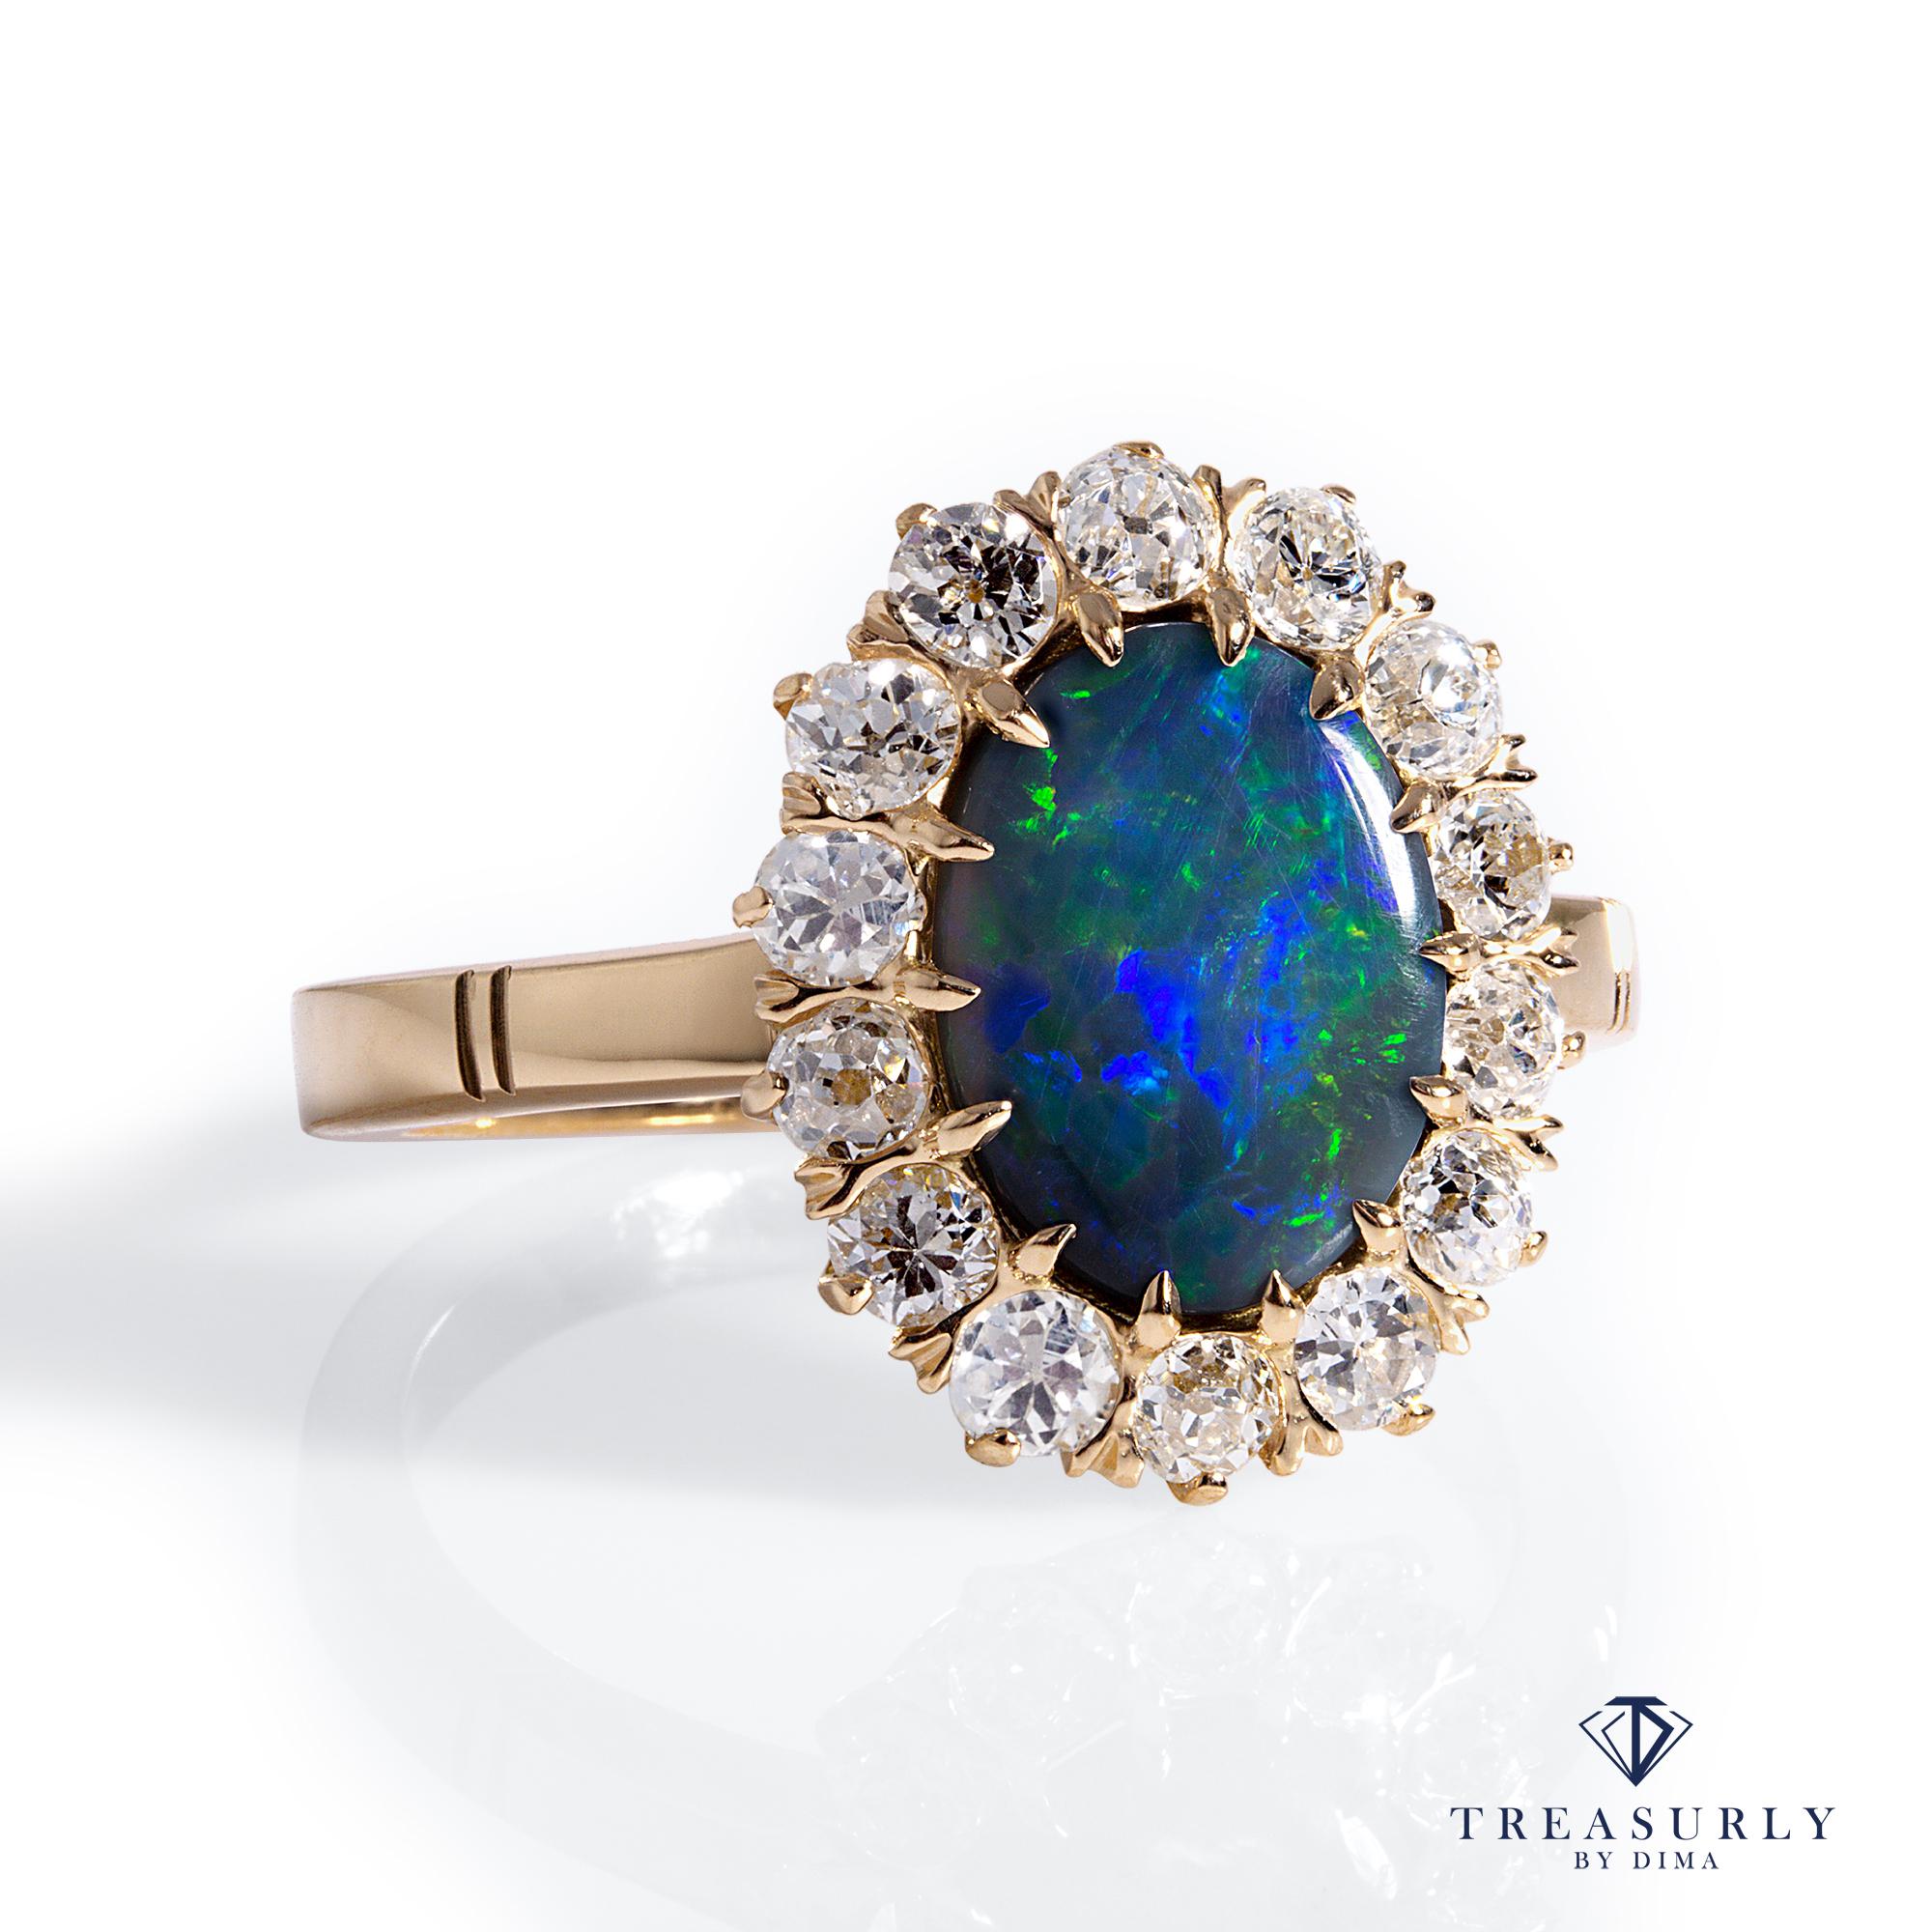 A Beautiful Classic VICTORIAN Black Australian Opal and Diamond Cluster Flower shaped Ring in 18K Yellow Gold.

Highly prized and sought after by kings, emperors, maharajas and sultans, the majestic Opal has been desired throughout the ages. From